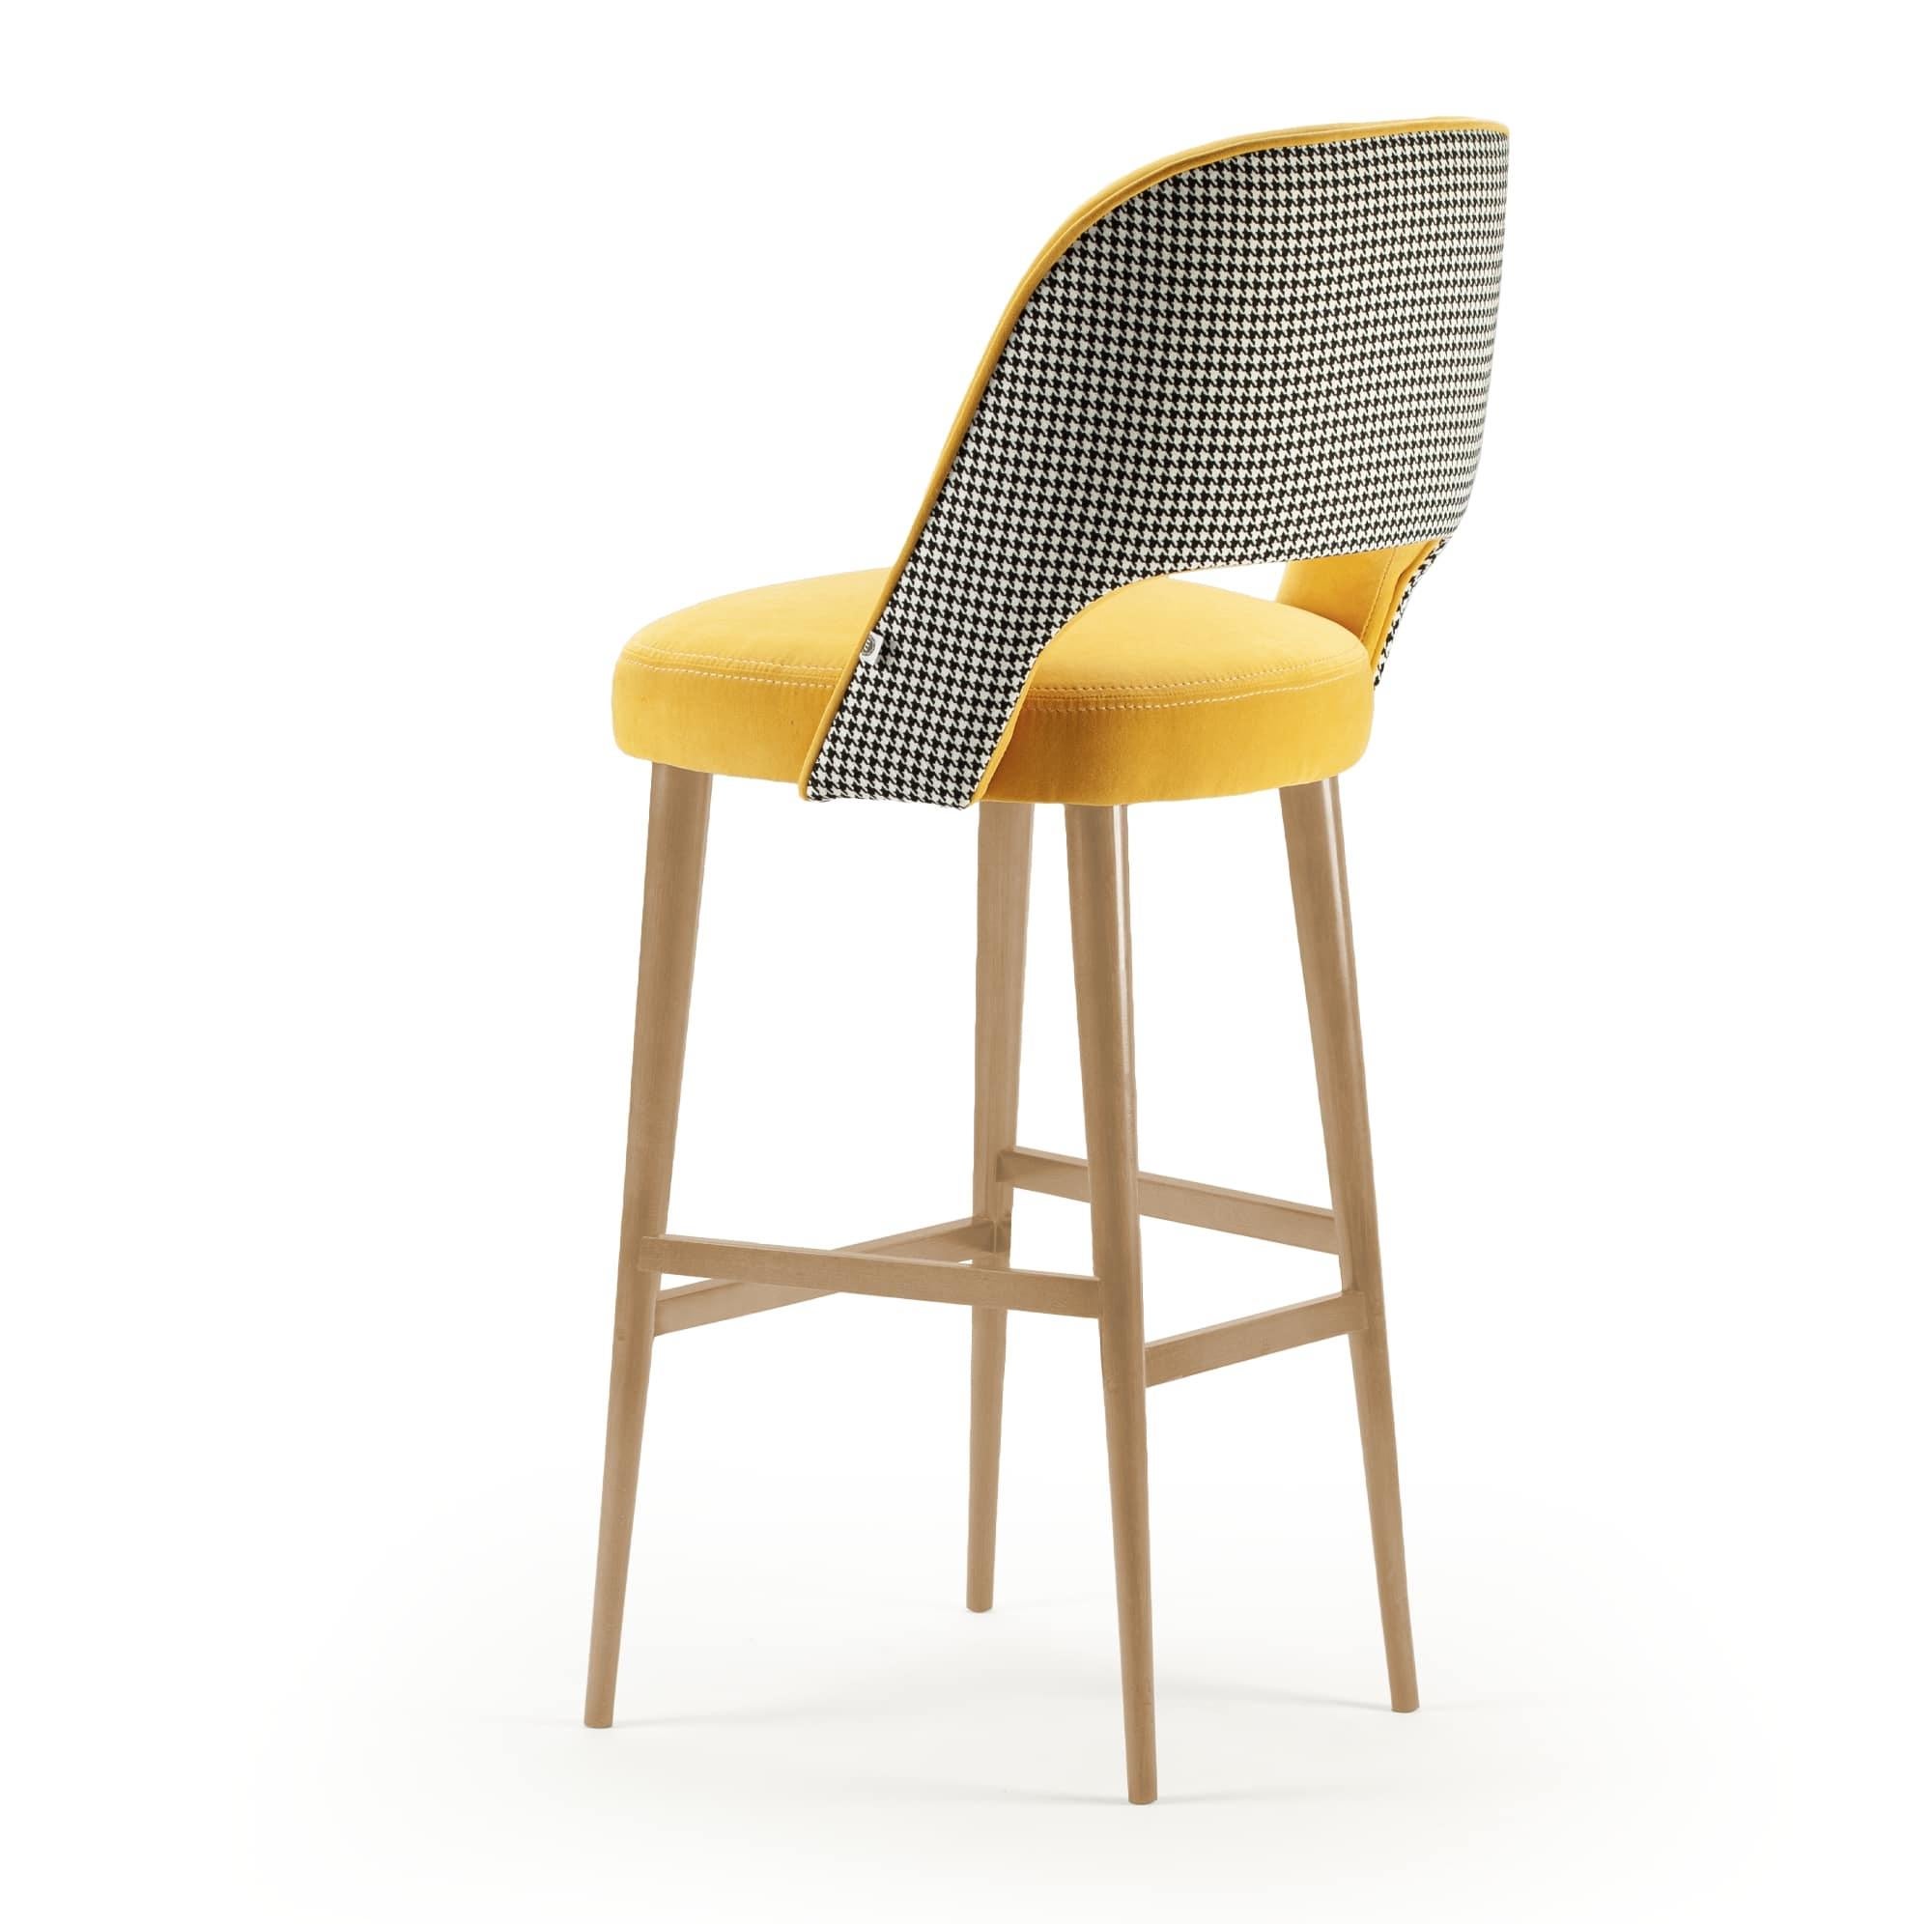 Comfortable and elegant, Ava bar stool is a versatile piece where creativity meets no boundaries: fabrics, solid wood, lacquered wood and brass fittings are chosen and combined to produce the perfect combination to each space and concept. Made to